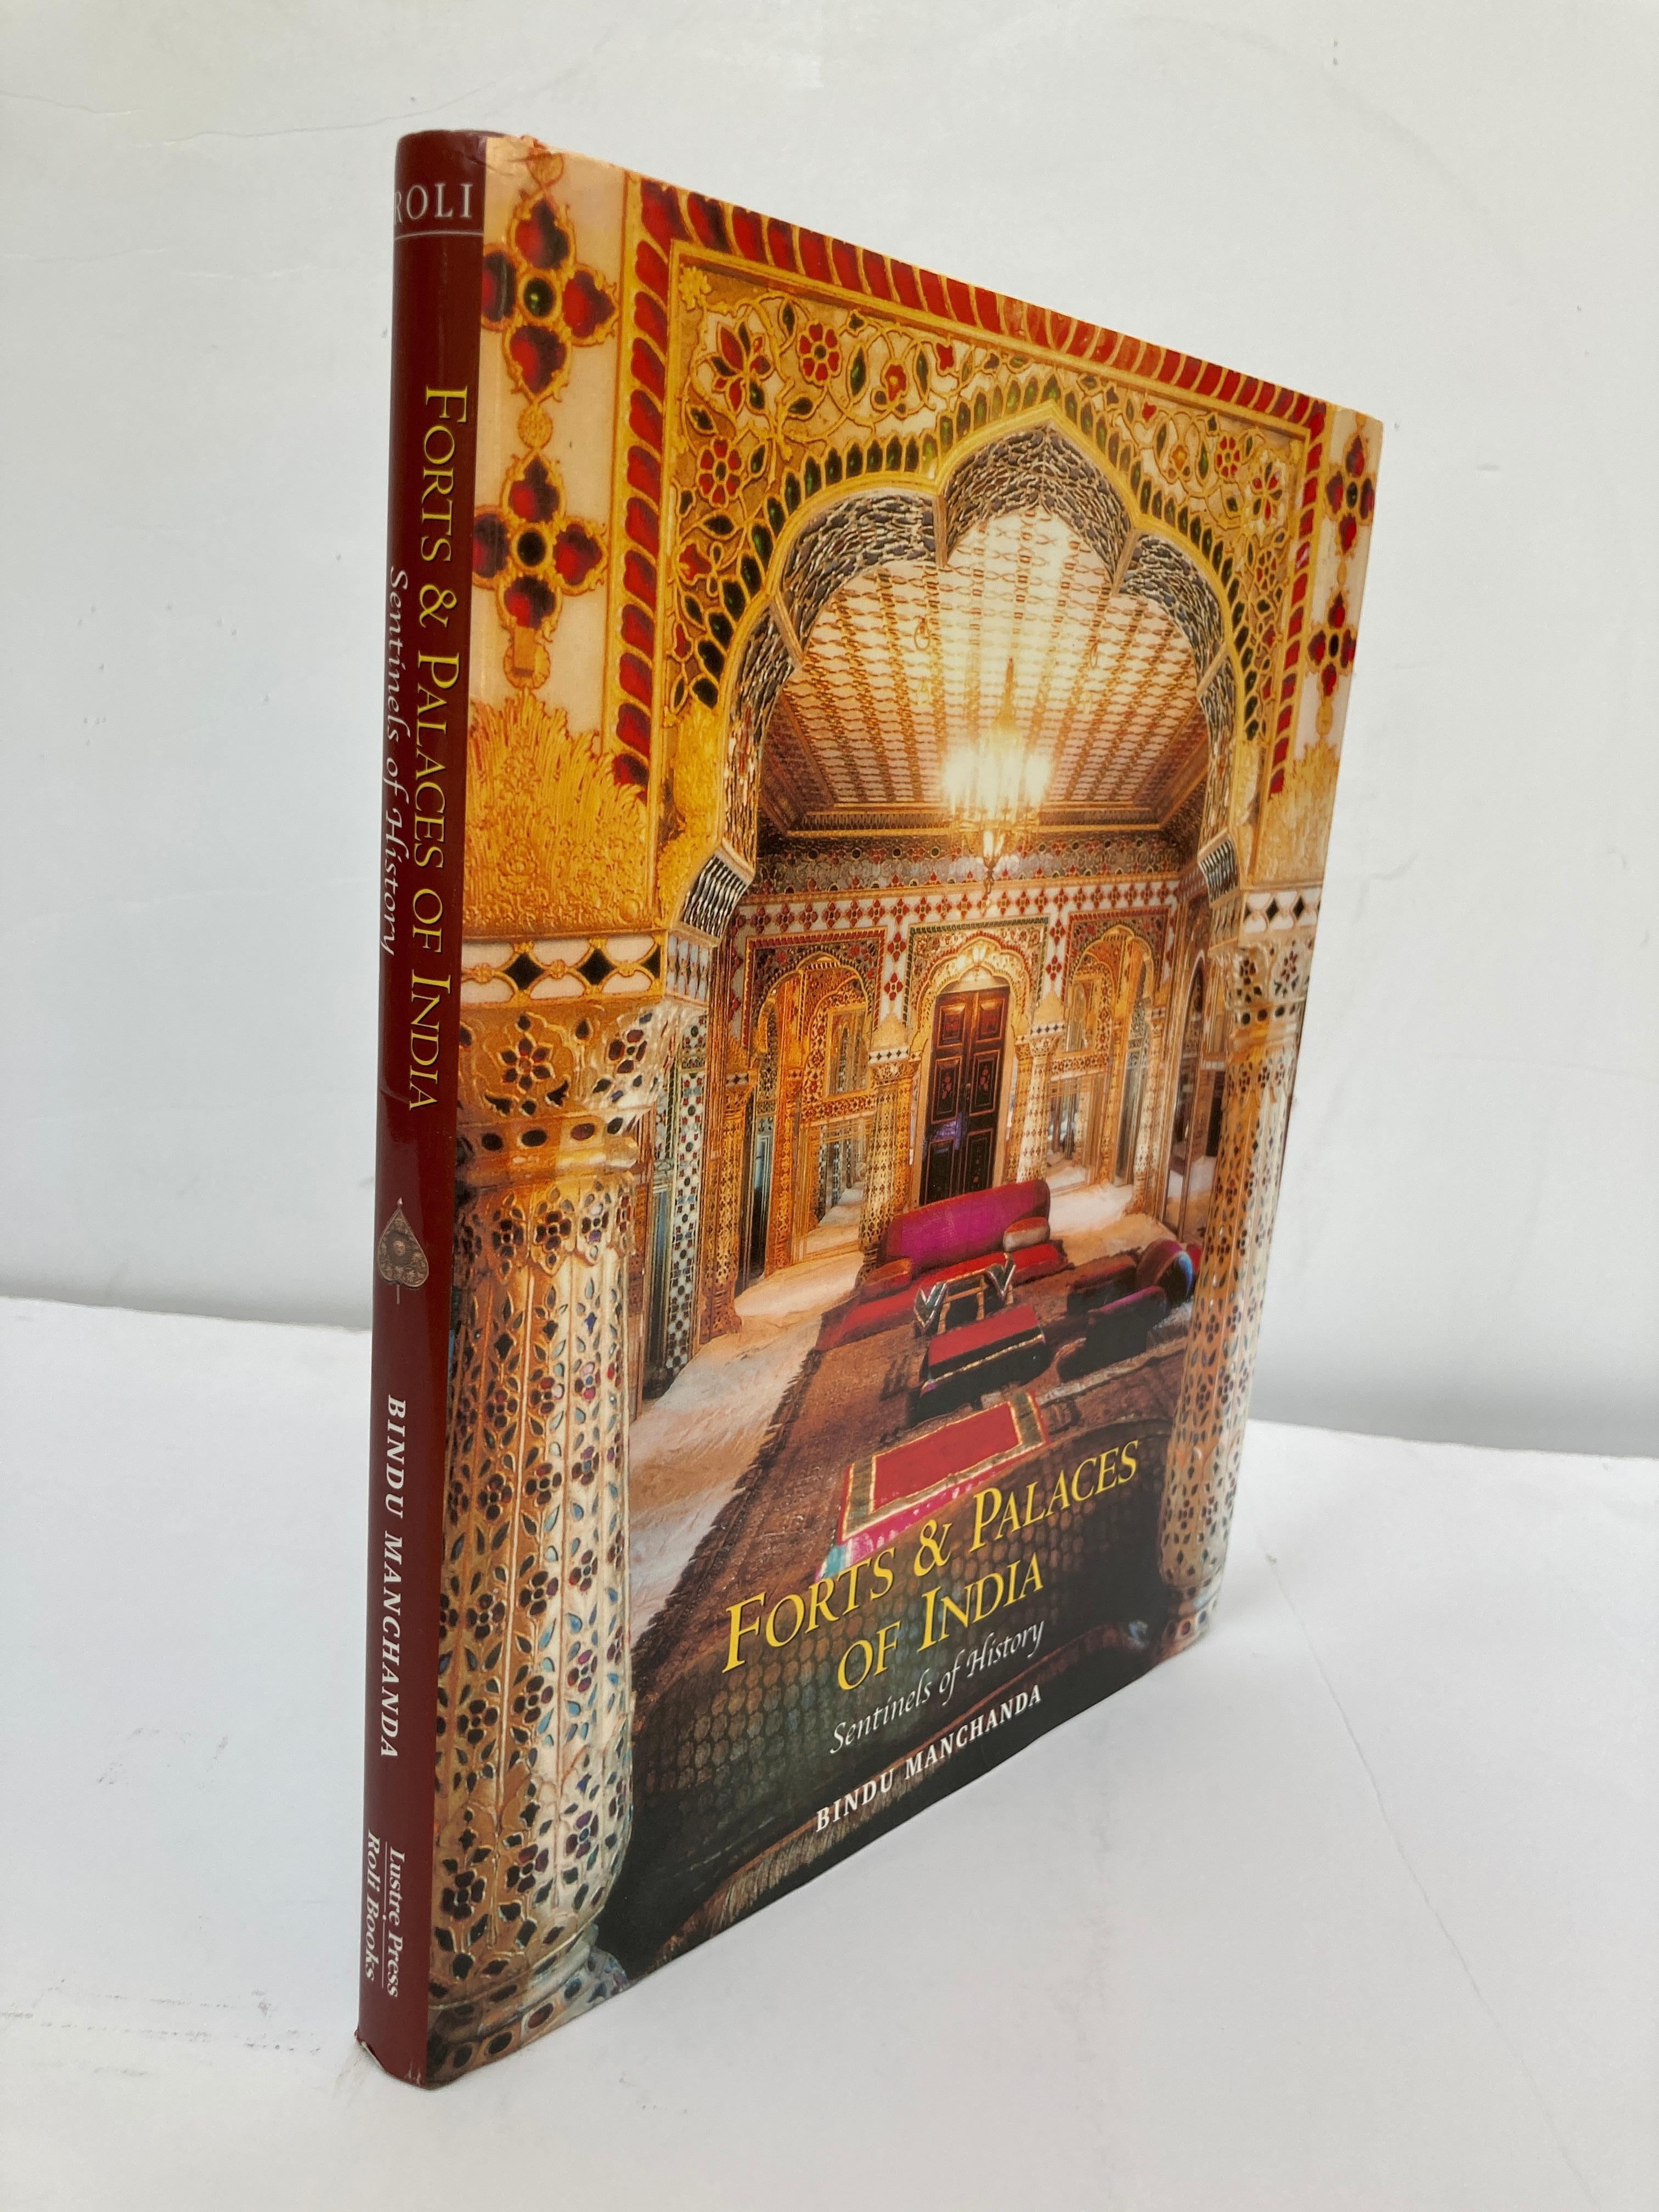 Forts & Palaces of India: Sentinels of History Hardcover
India has a rich cultural past and this is reflected in its innumerable forts, palaces and other monuments, which abound not only in architectural splendour but intriguing individual